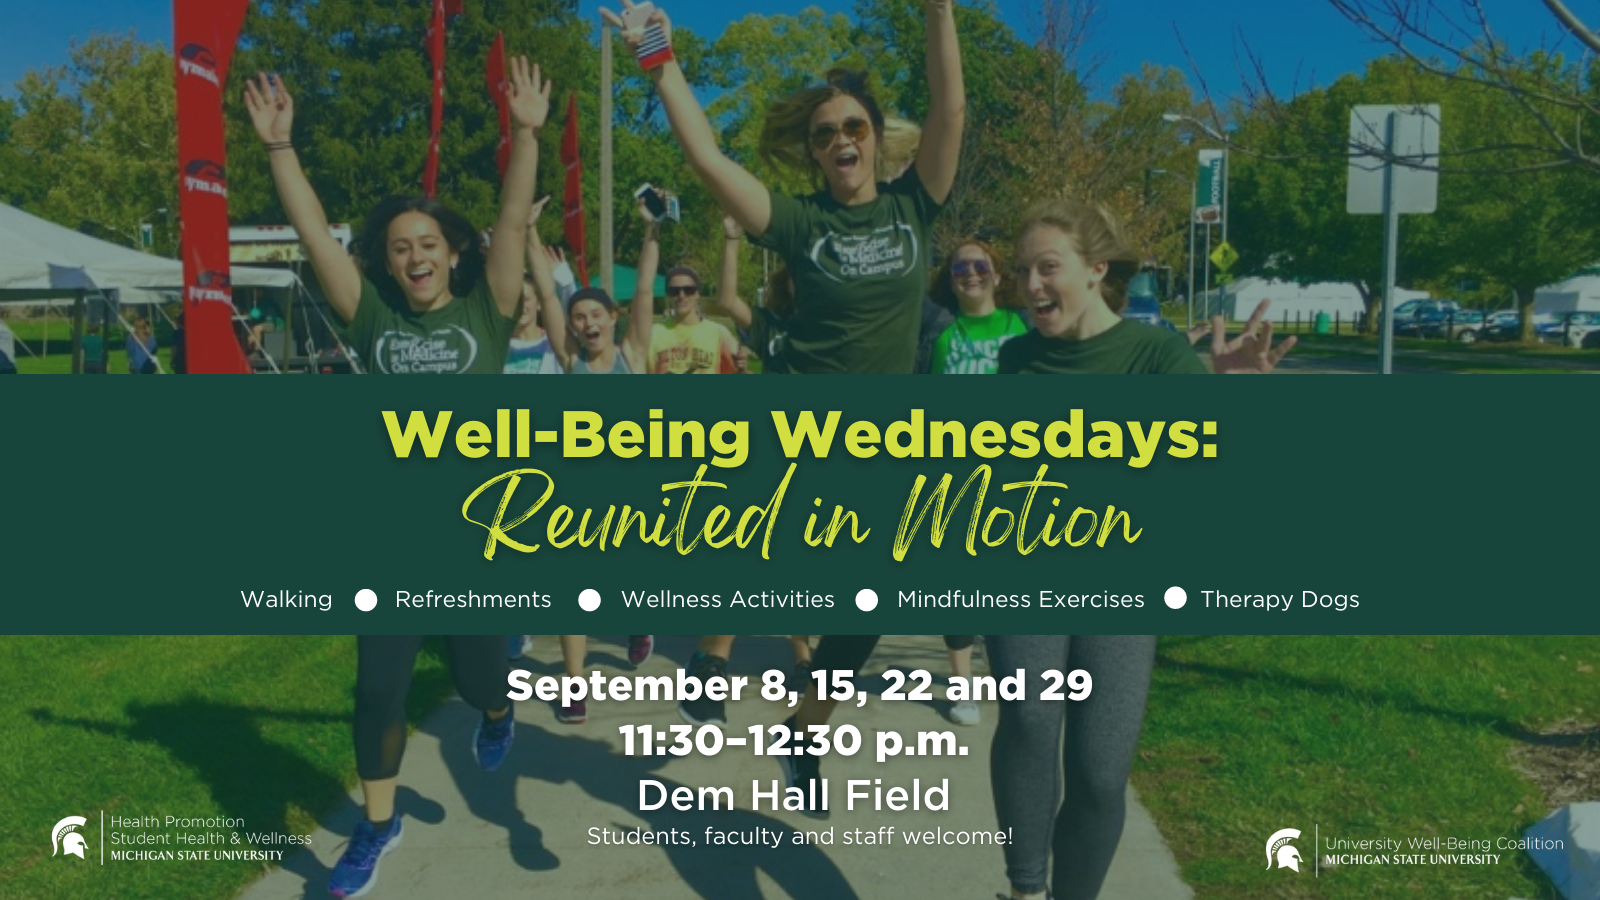 This is an image of students jumping that says Wellbeing Wednesdays: Reunited in Motion